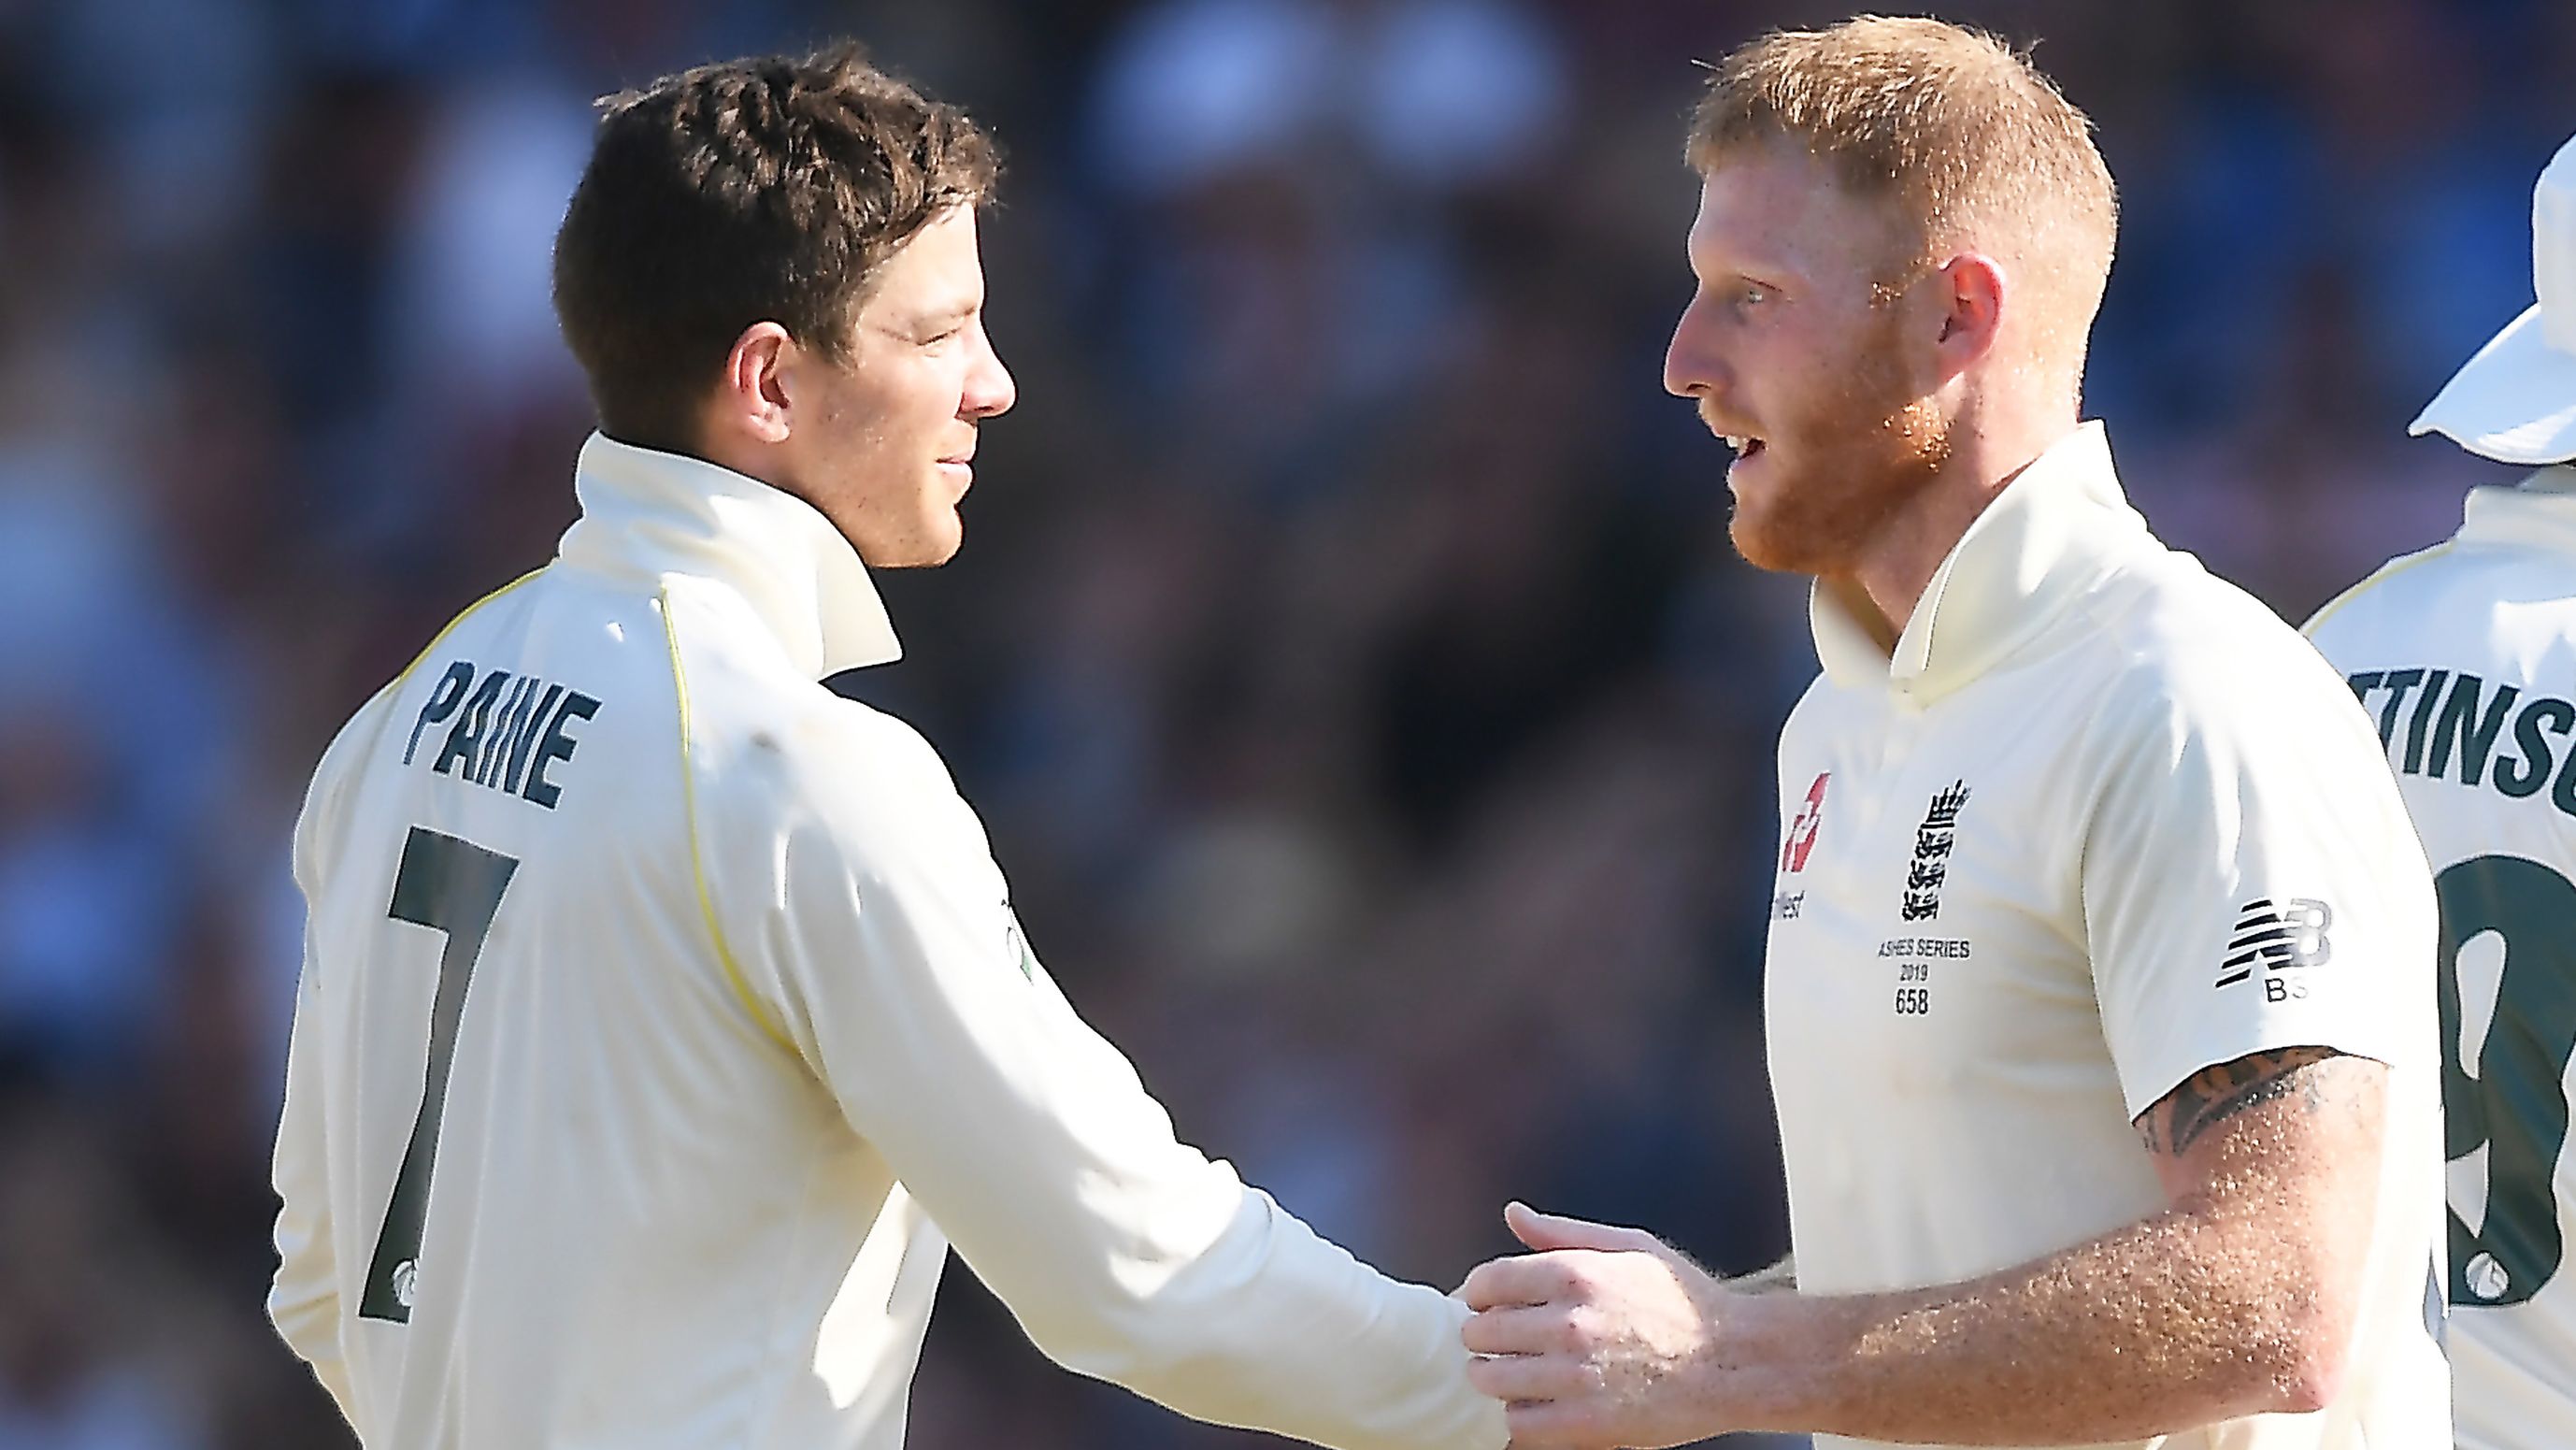 Ben Stokes (r) of England shakes hands with Tim Paine (l) of Australia during Day Four of the 3rd Specsavers Ashes Test match between England and Australia at Headingley on August 25, 2019 in Leeds, England. (Photo by Alex Davidson/Getty Images)